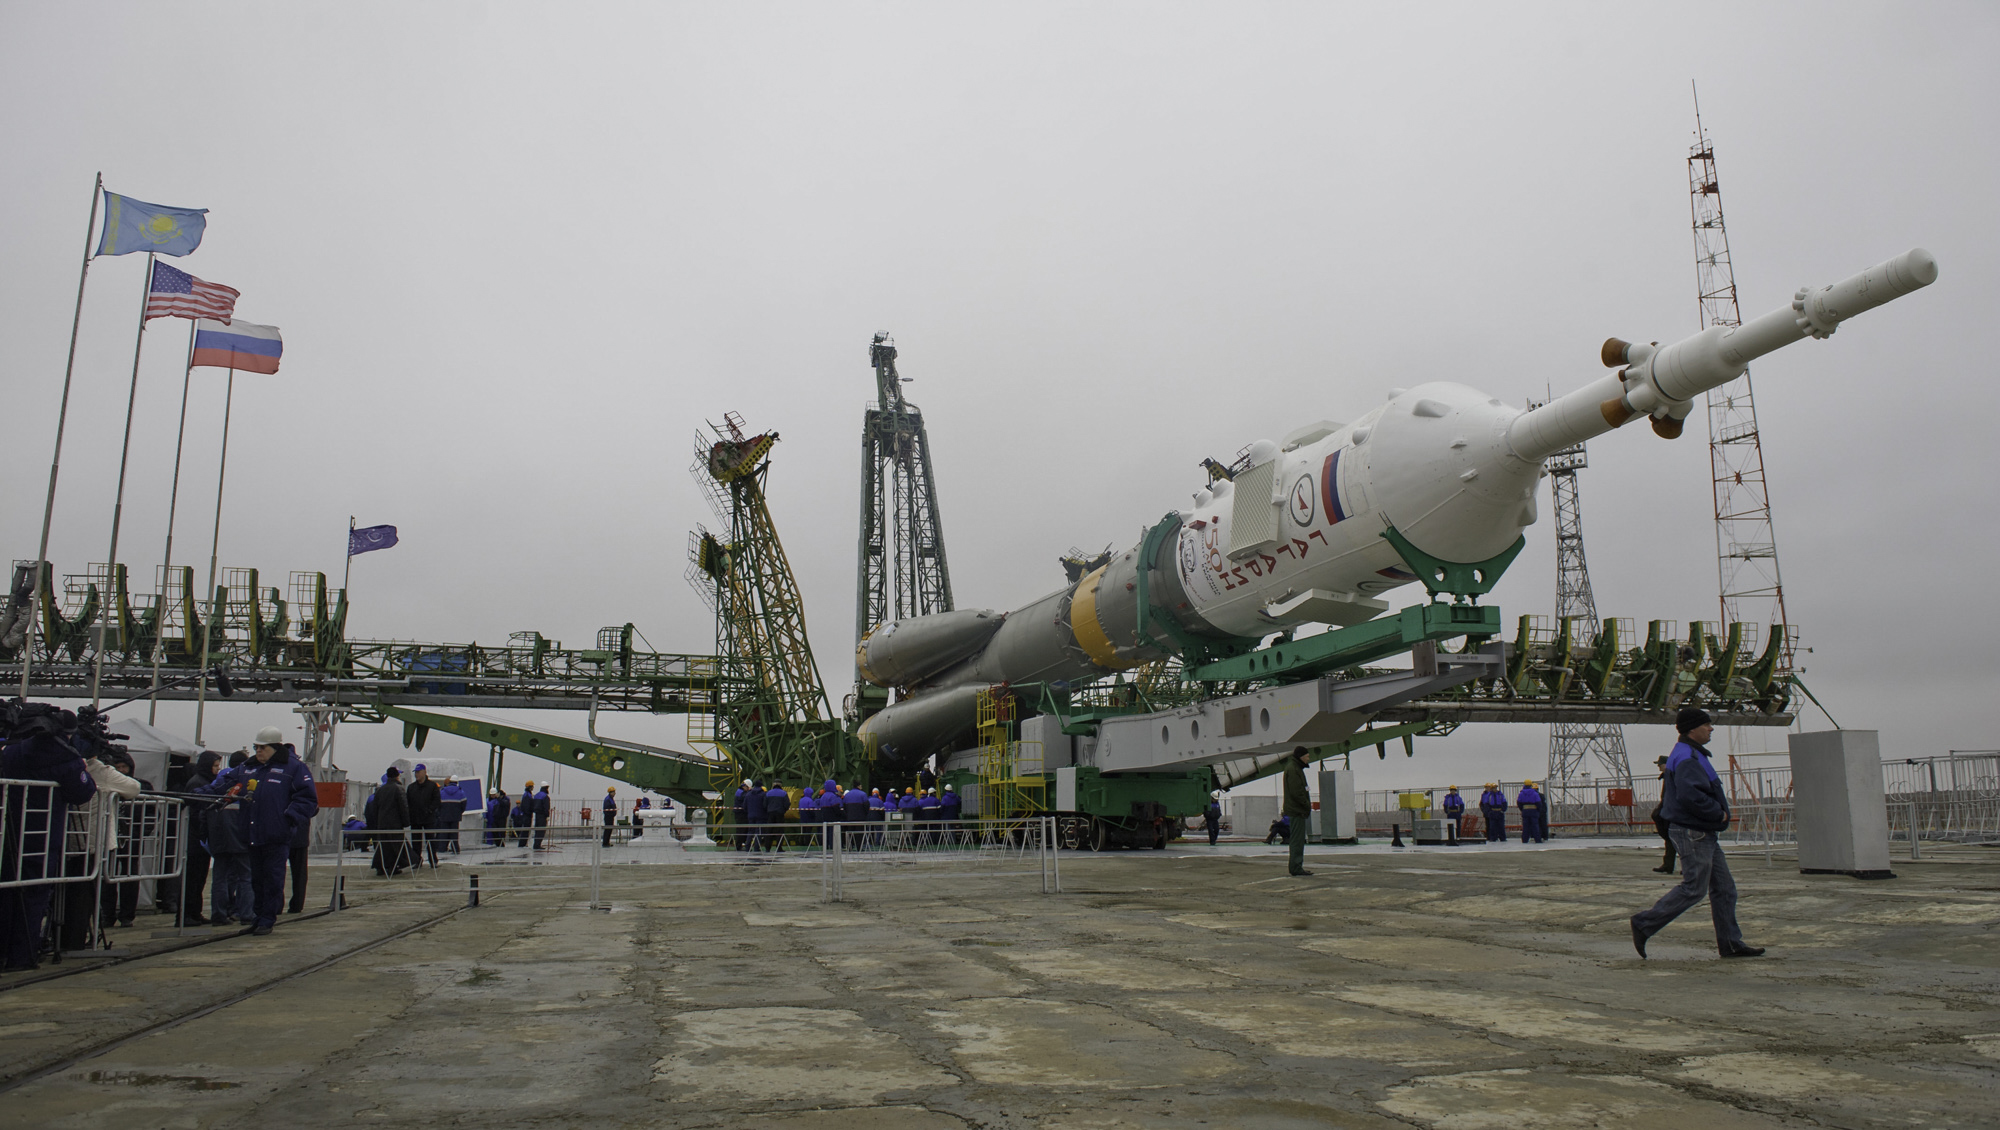  The Soyuz TMA-21 spacecraft is seen shortly after arriving at the launch pad Saturday, April 2, 2011 at the Baikonur Cosmodrome in Kazakhstan. The Soyuz, which has been dubbed “Gagarin”, is launching one week shy of the 50th anniversary of the launc